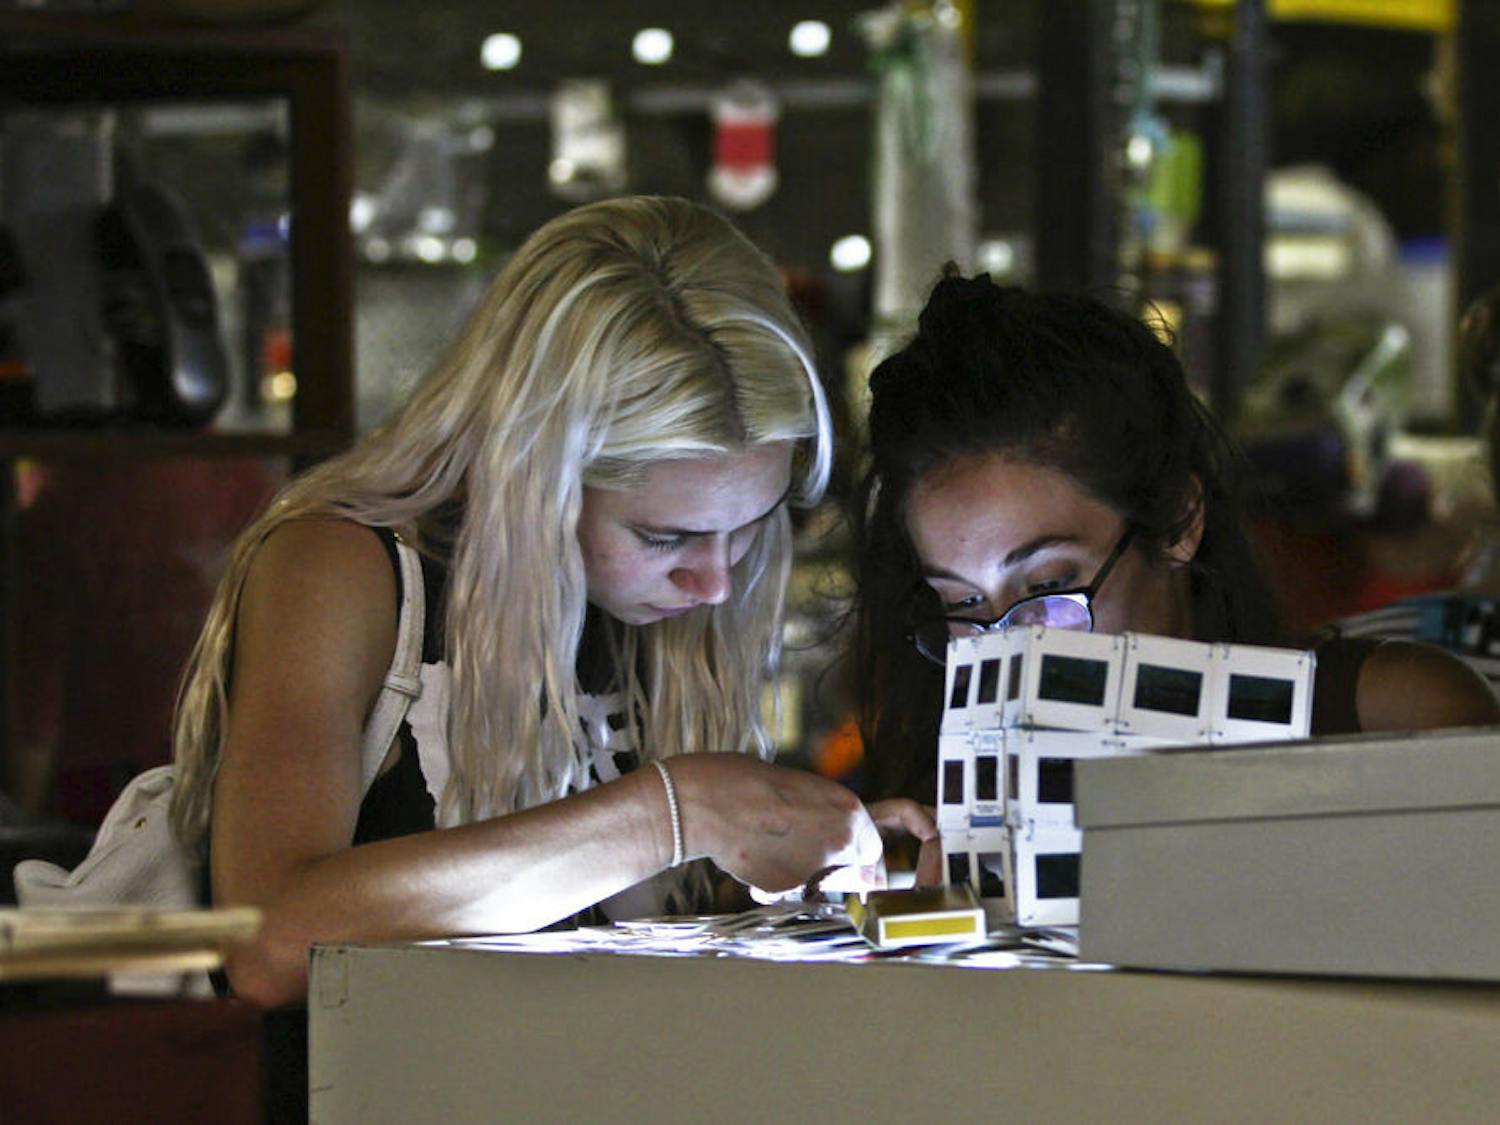 Finance major Peyton Hilford (left) looks at film negatives and slides with 20-year-old UF graphic design junior Maitane Romagosa inside the Repurpose Project during the Fall Trash Festival. “I love trash,” said Hilford, a 20-year-old UF junior.